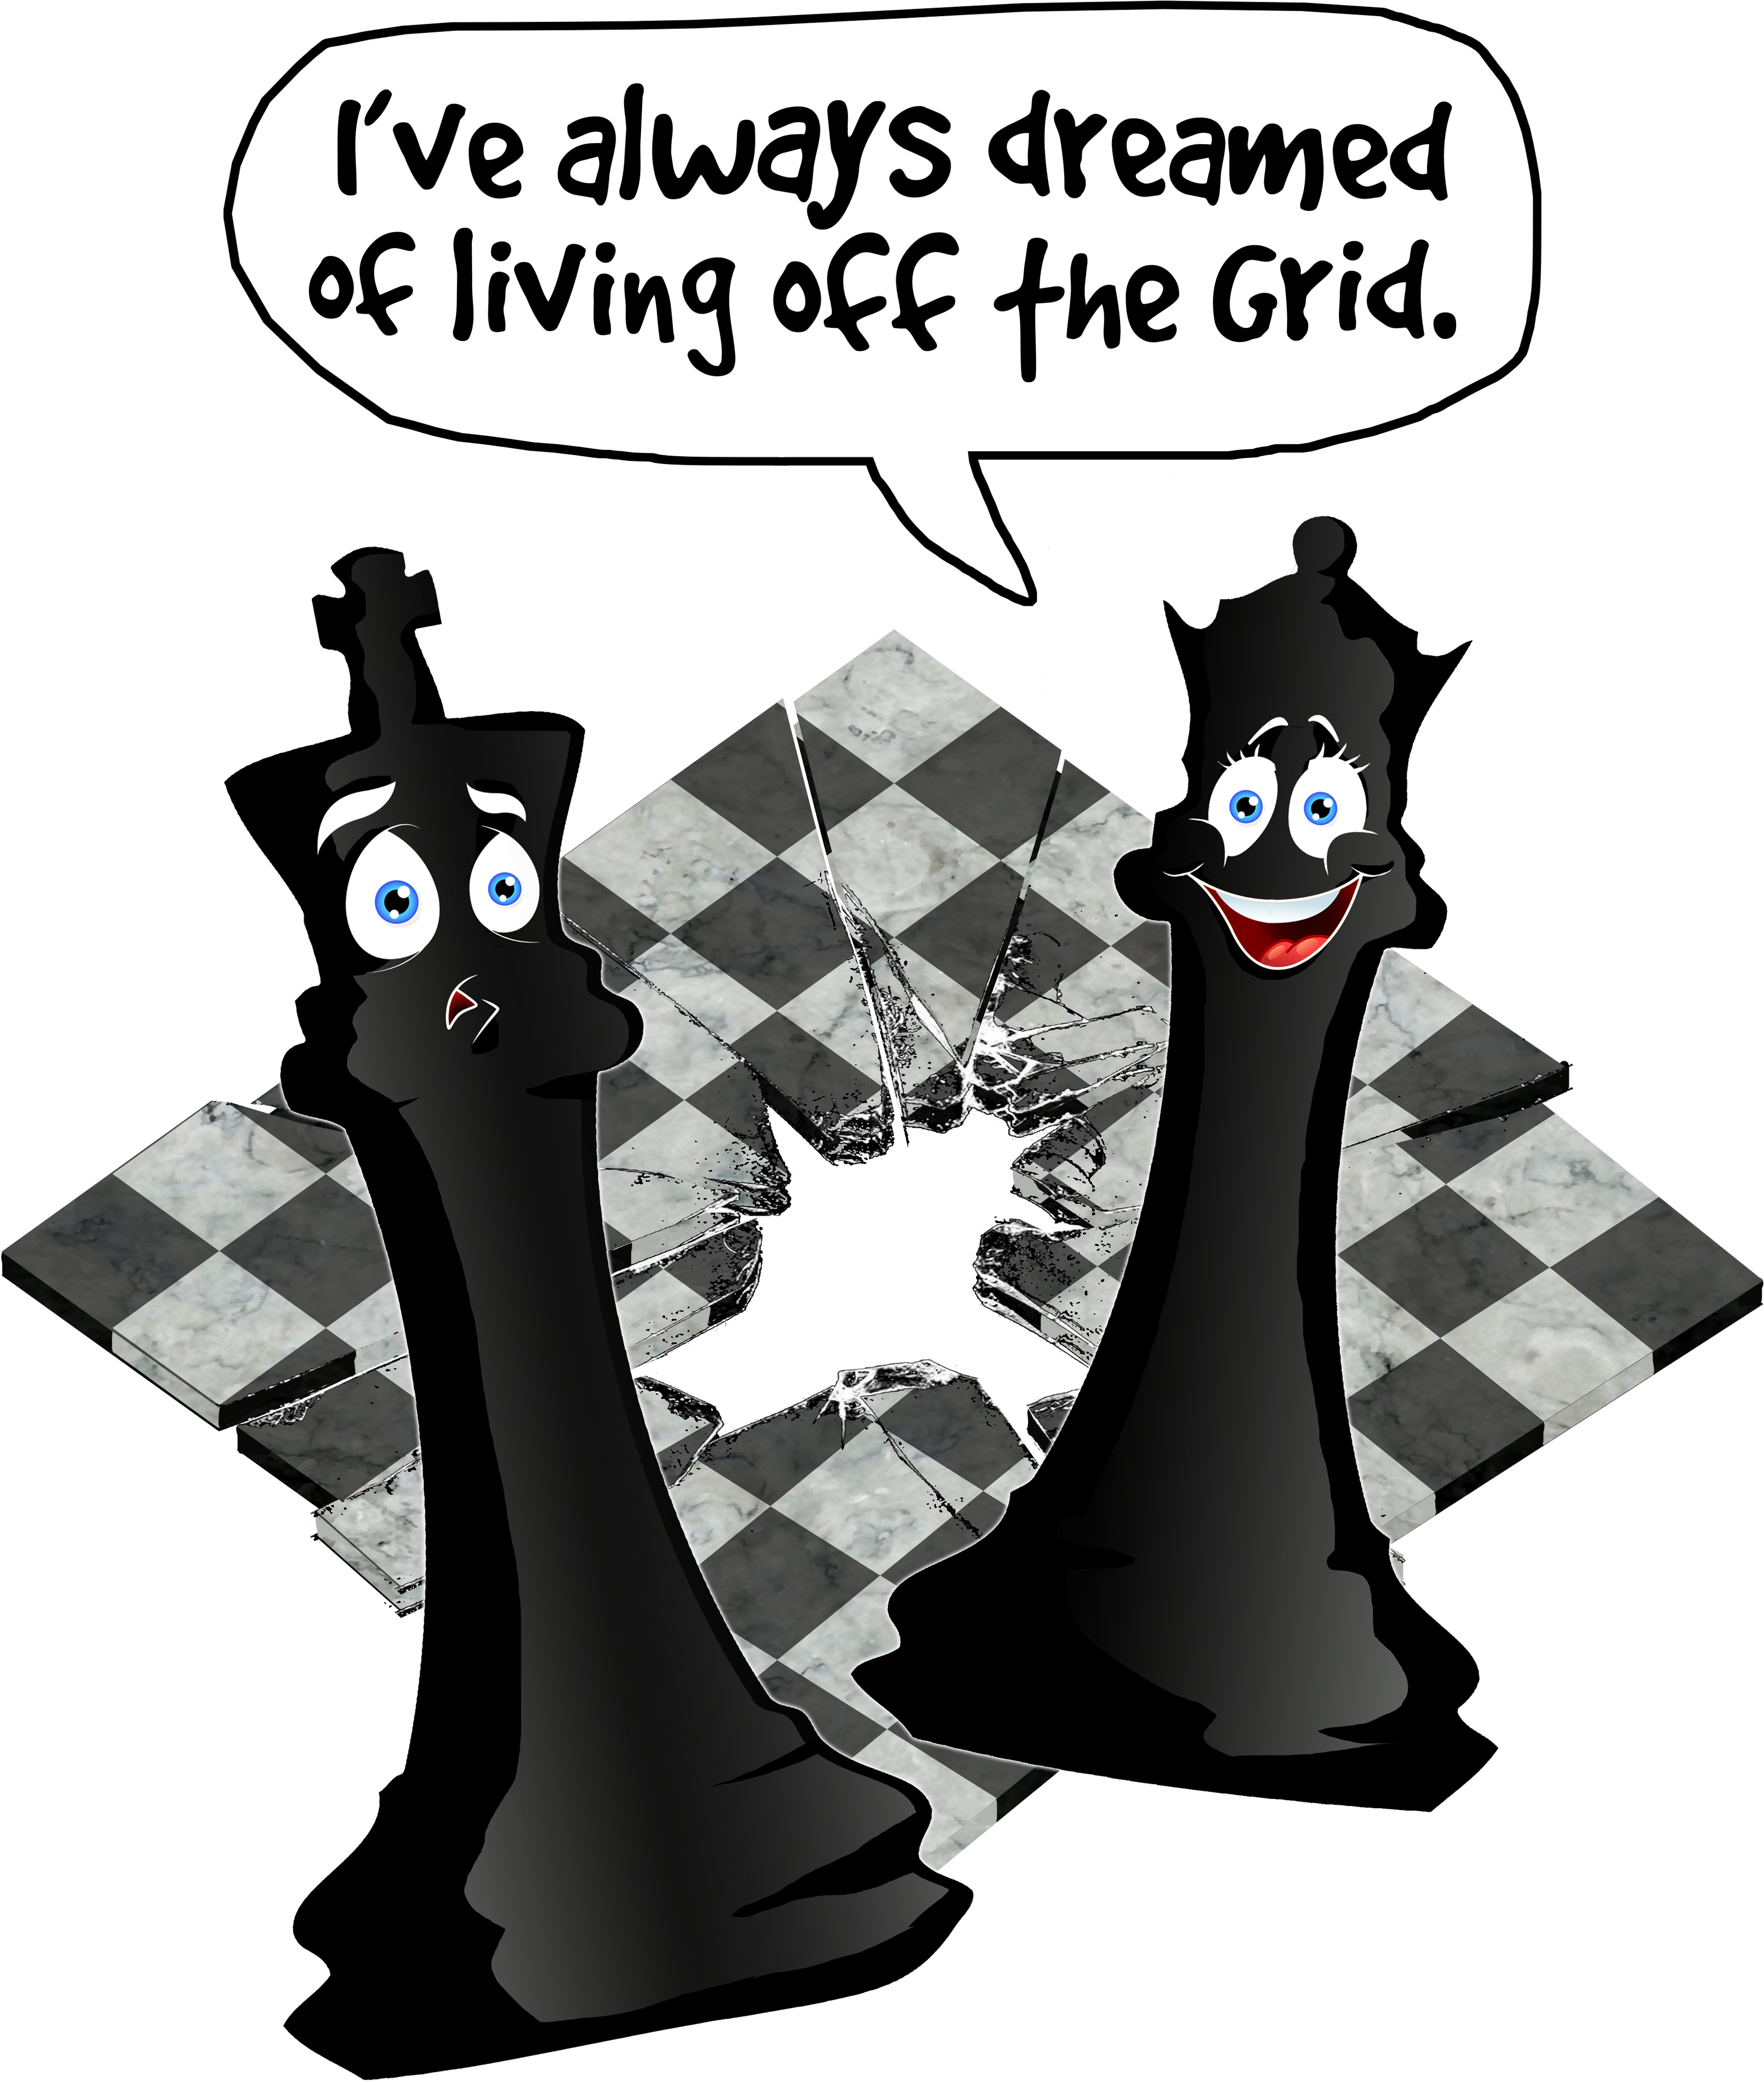 Chess Pieces Dream Off The Grid Meme